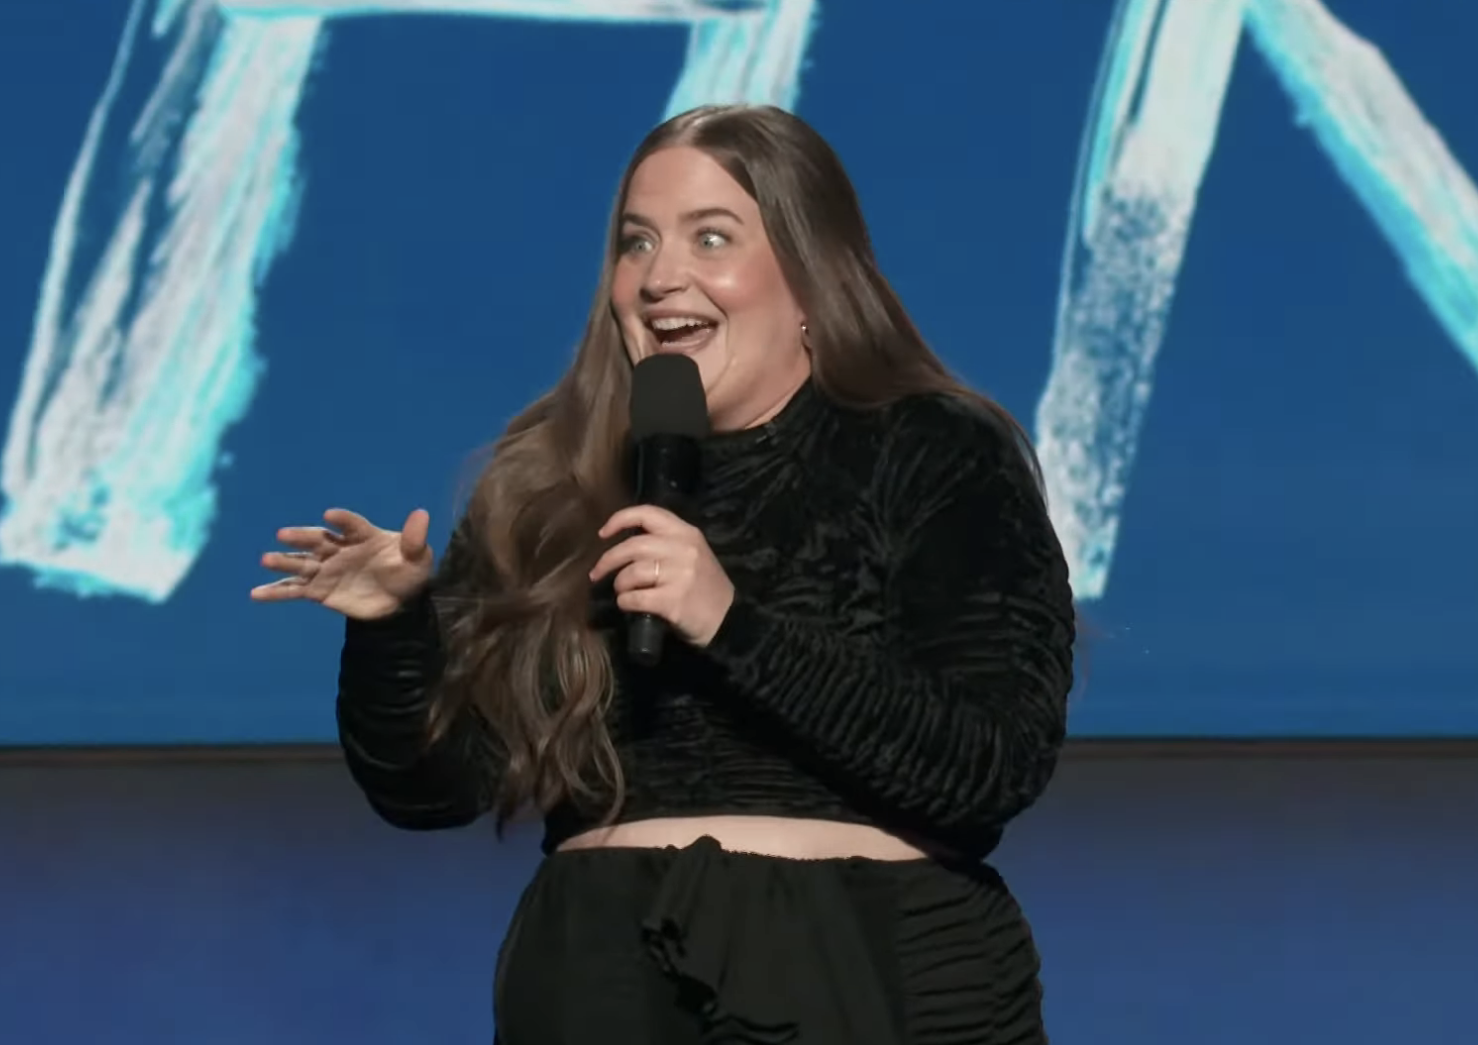 Aidy Bryant on stage at the 2022 Film Independent Spirit Awards, speaking into a microphone with projected graphics behind her